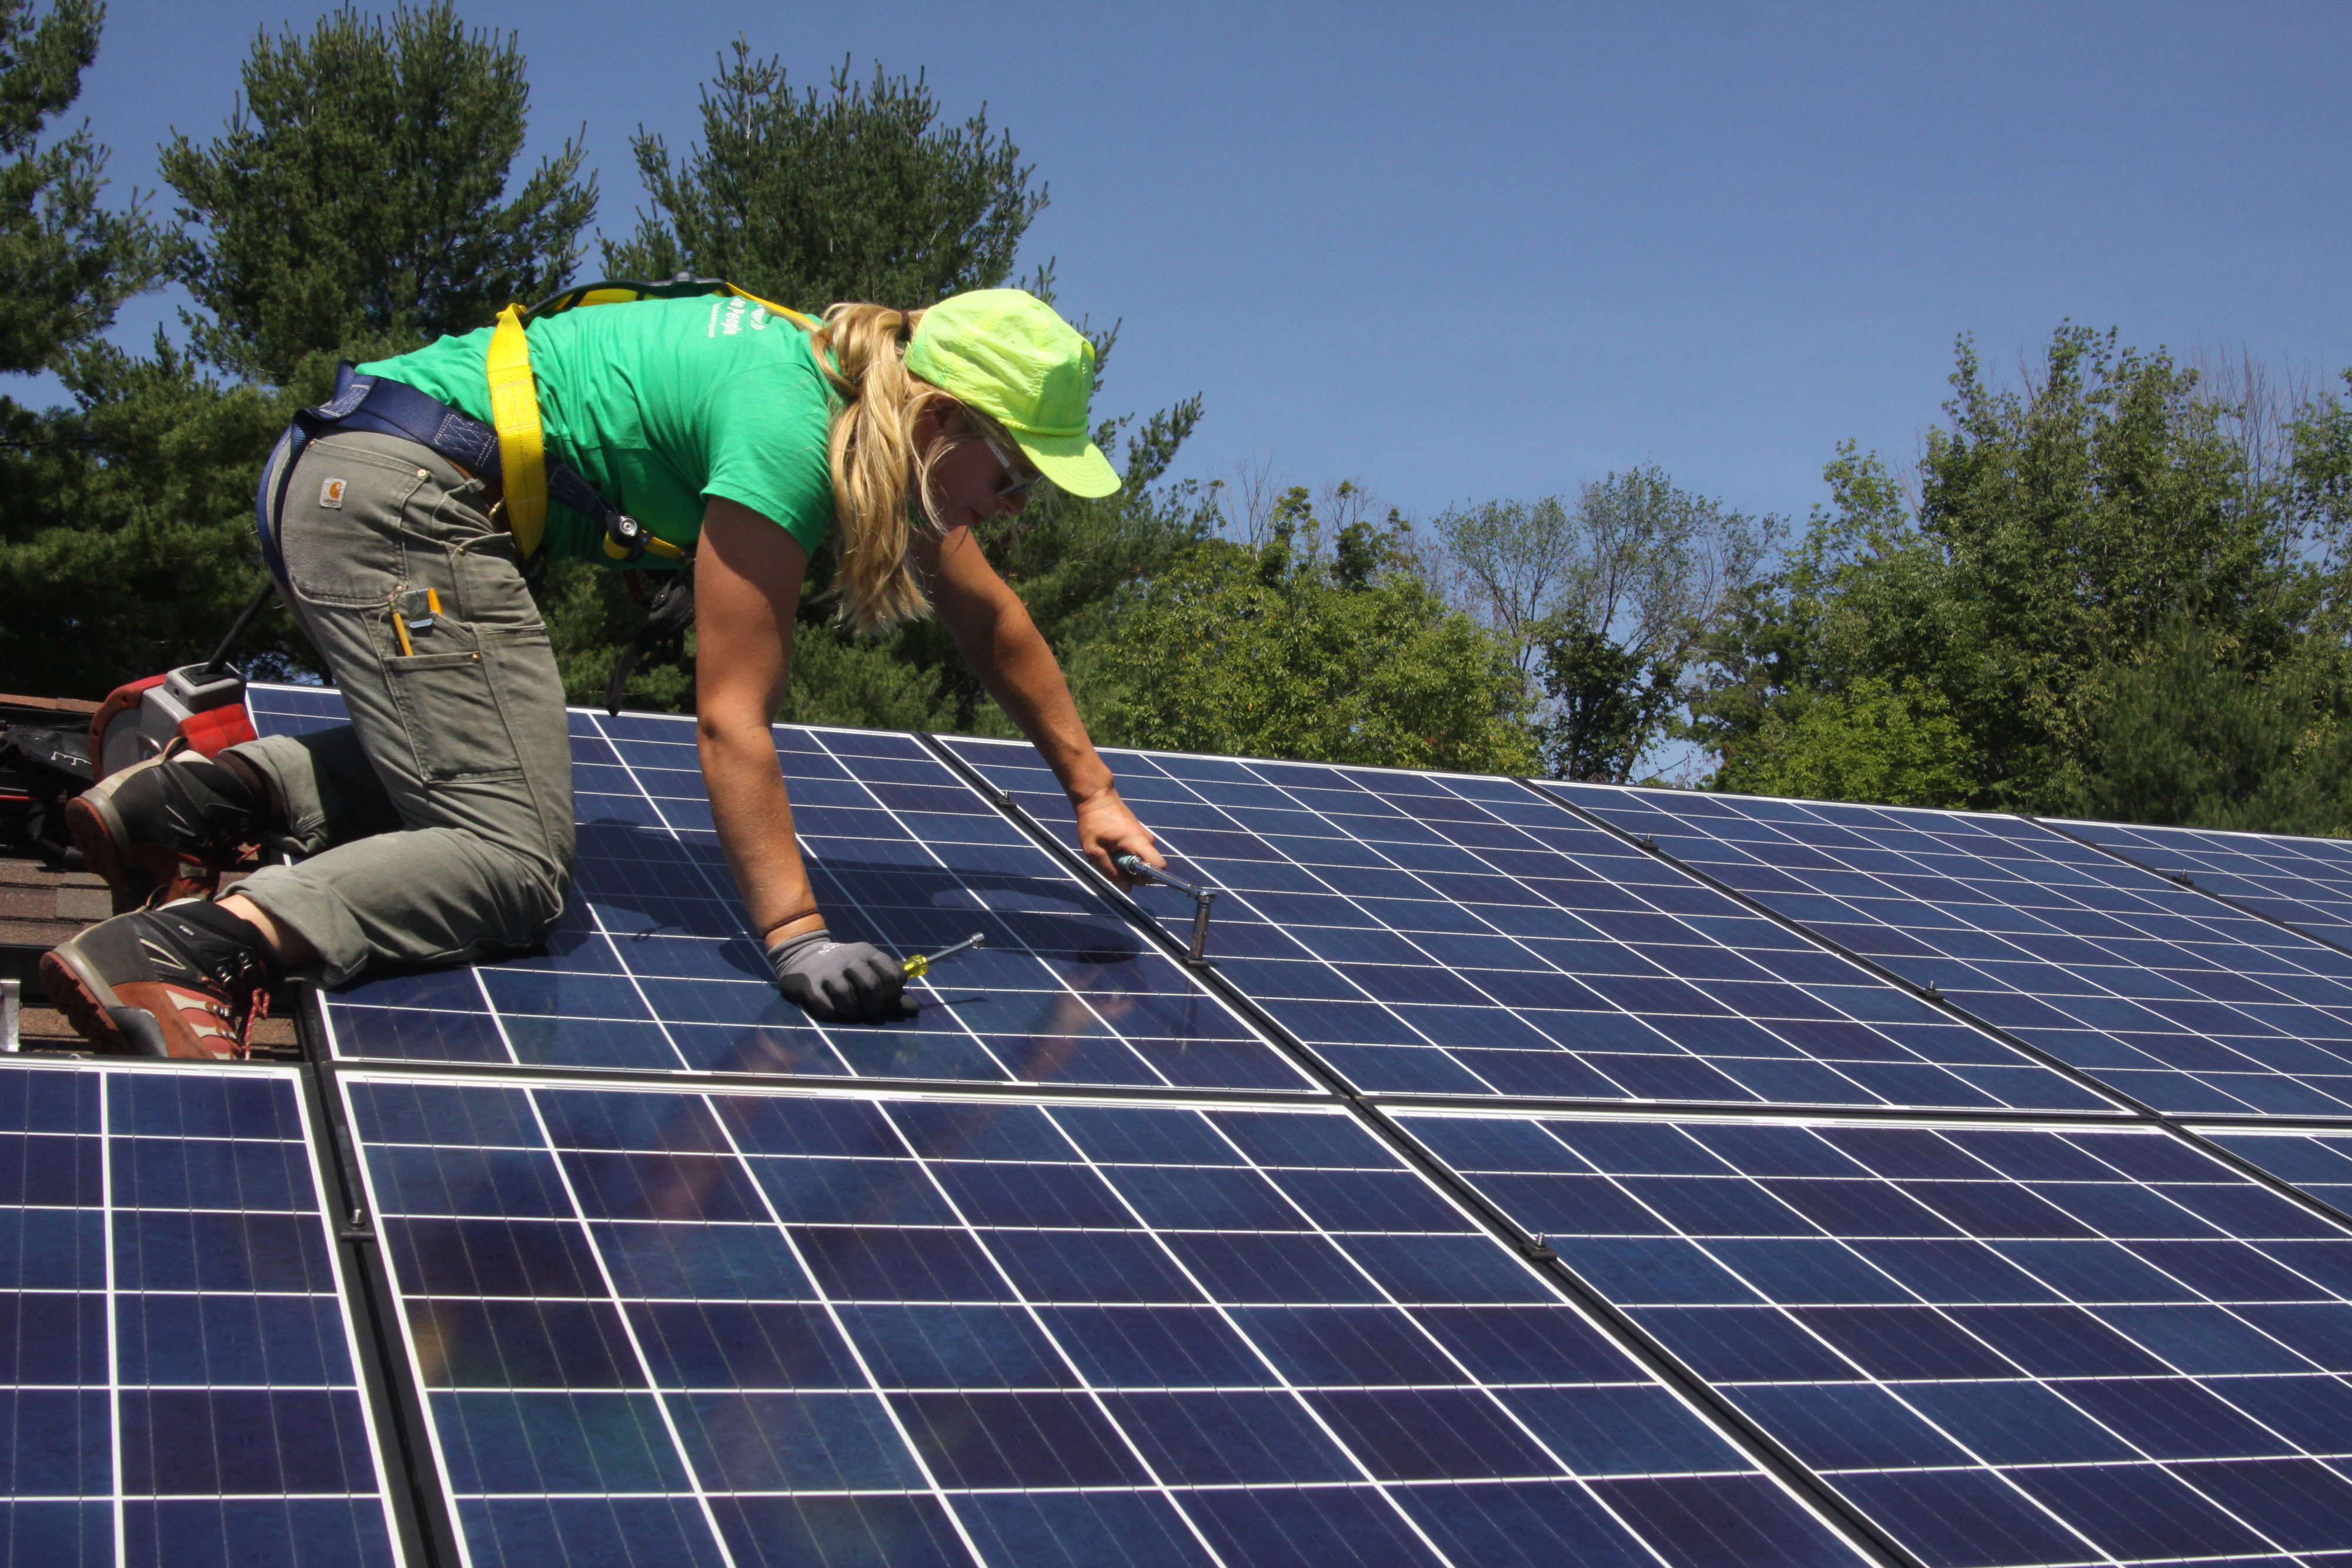 A worker installs solar panels on a roof.